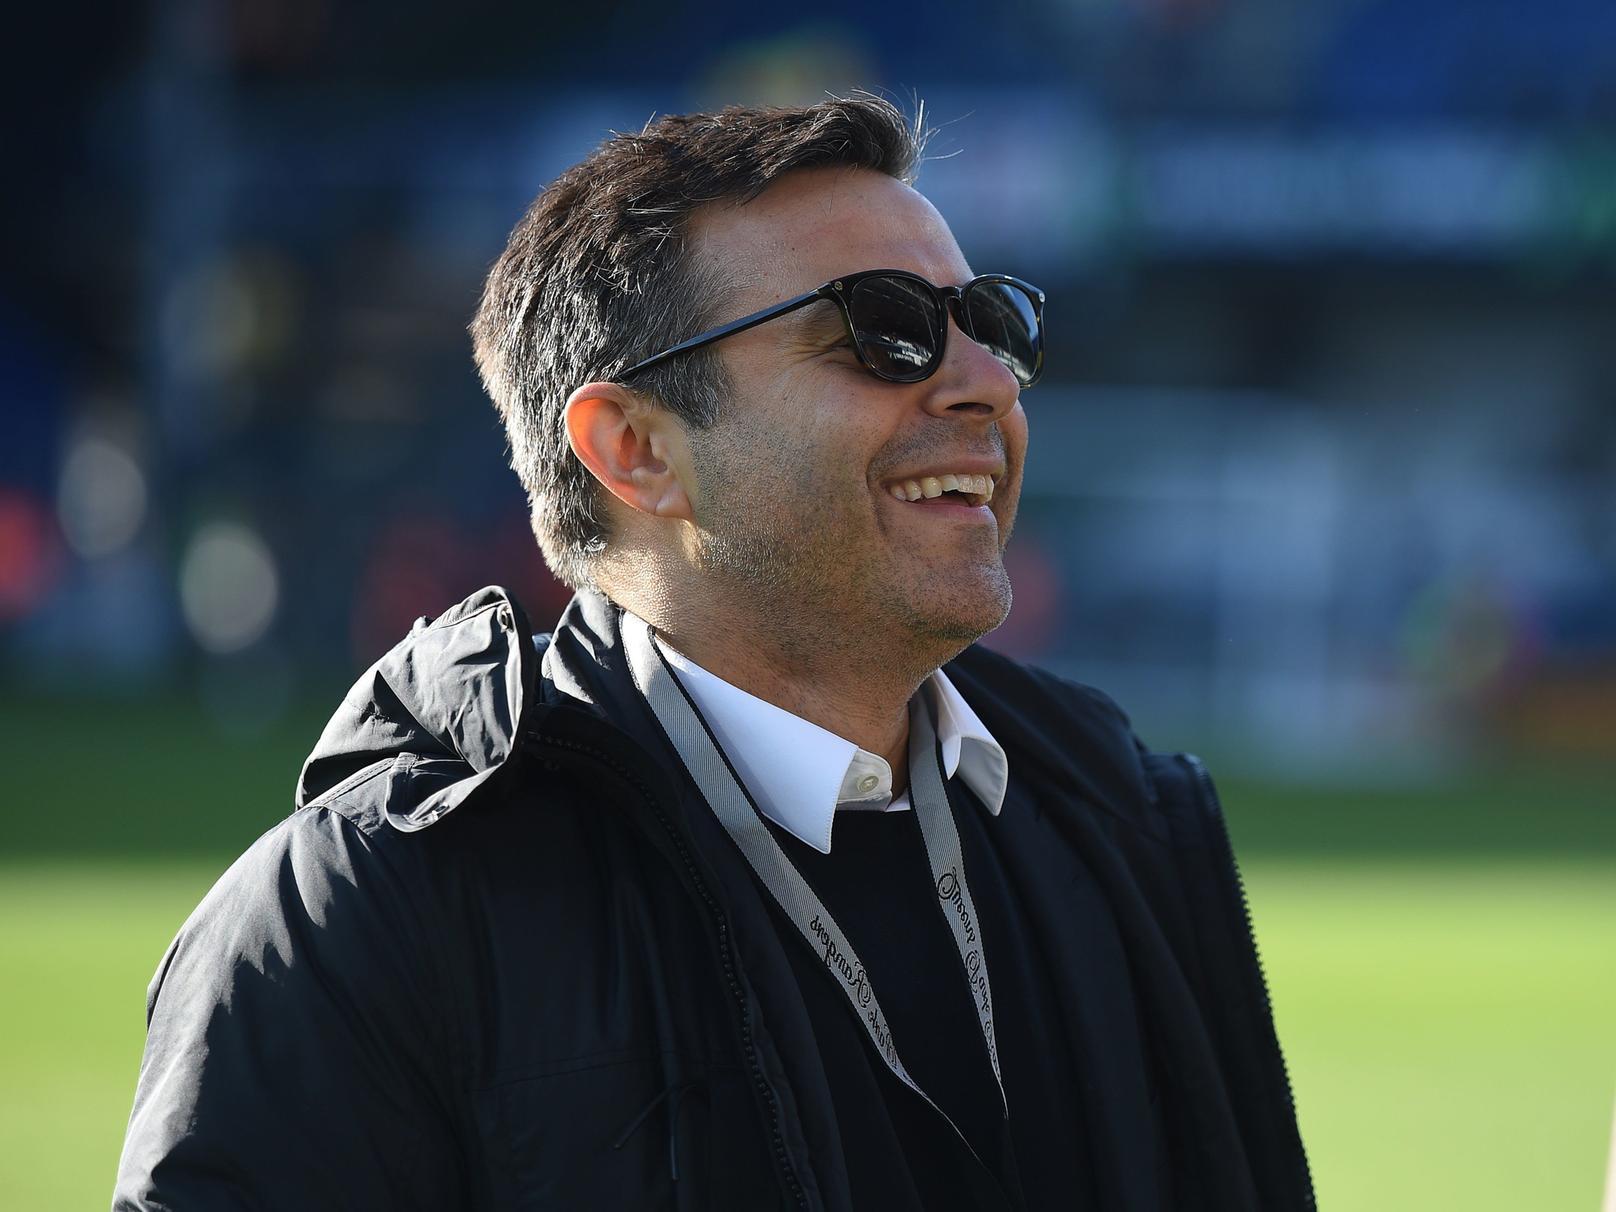 The Leeds owner fronted up on Twitter after the defeat left his club clinging on to 2nd place. And while Whites supporters might not all agree on what he said, Radrizzani certainly offered a rallying call.